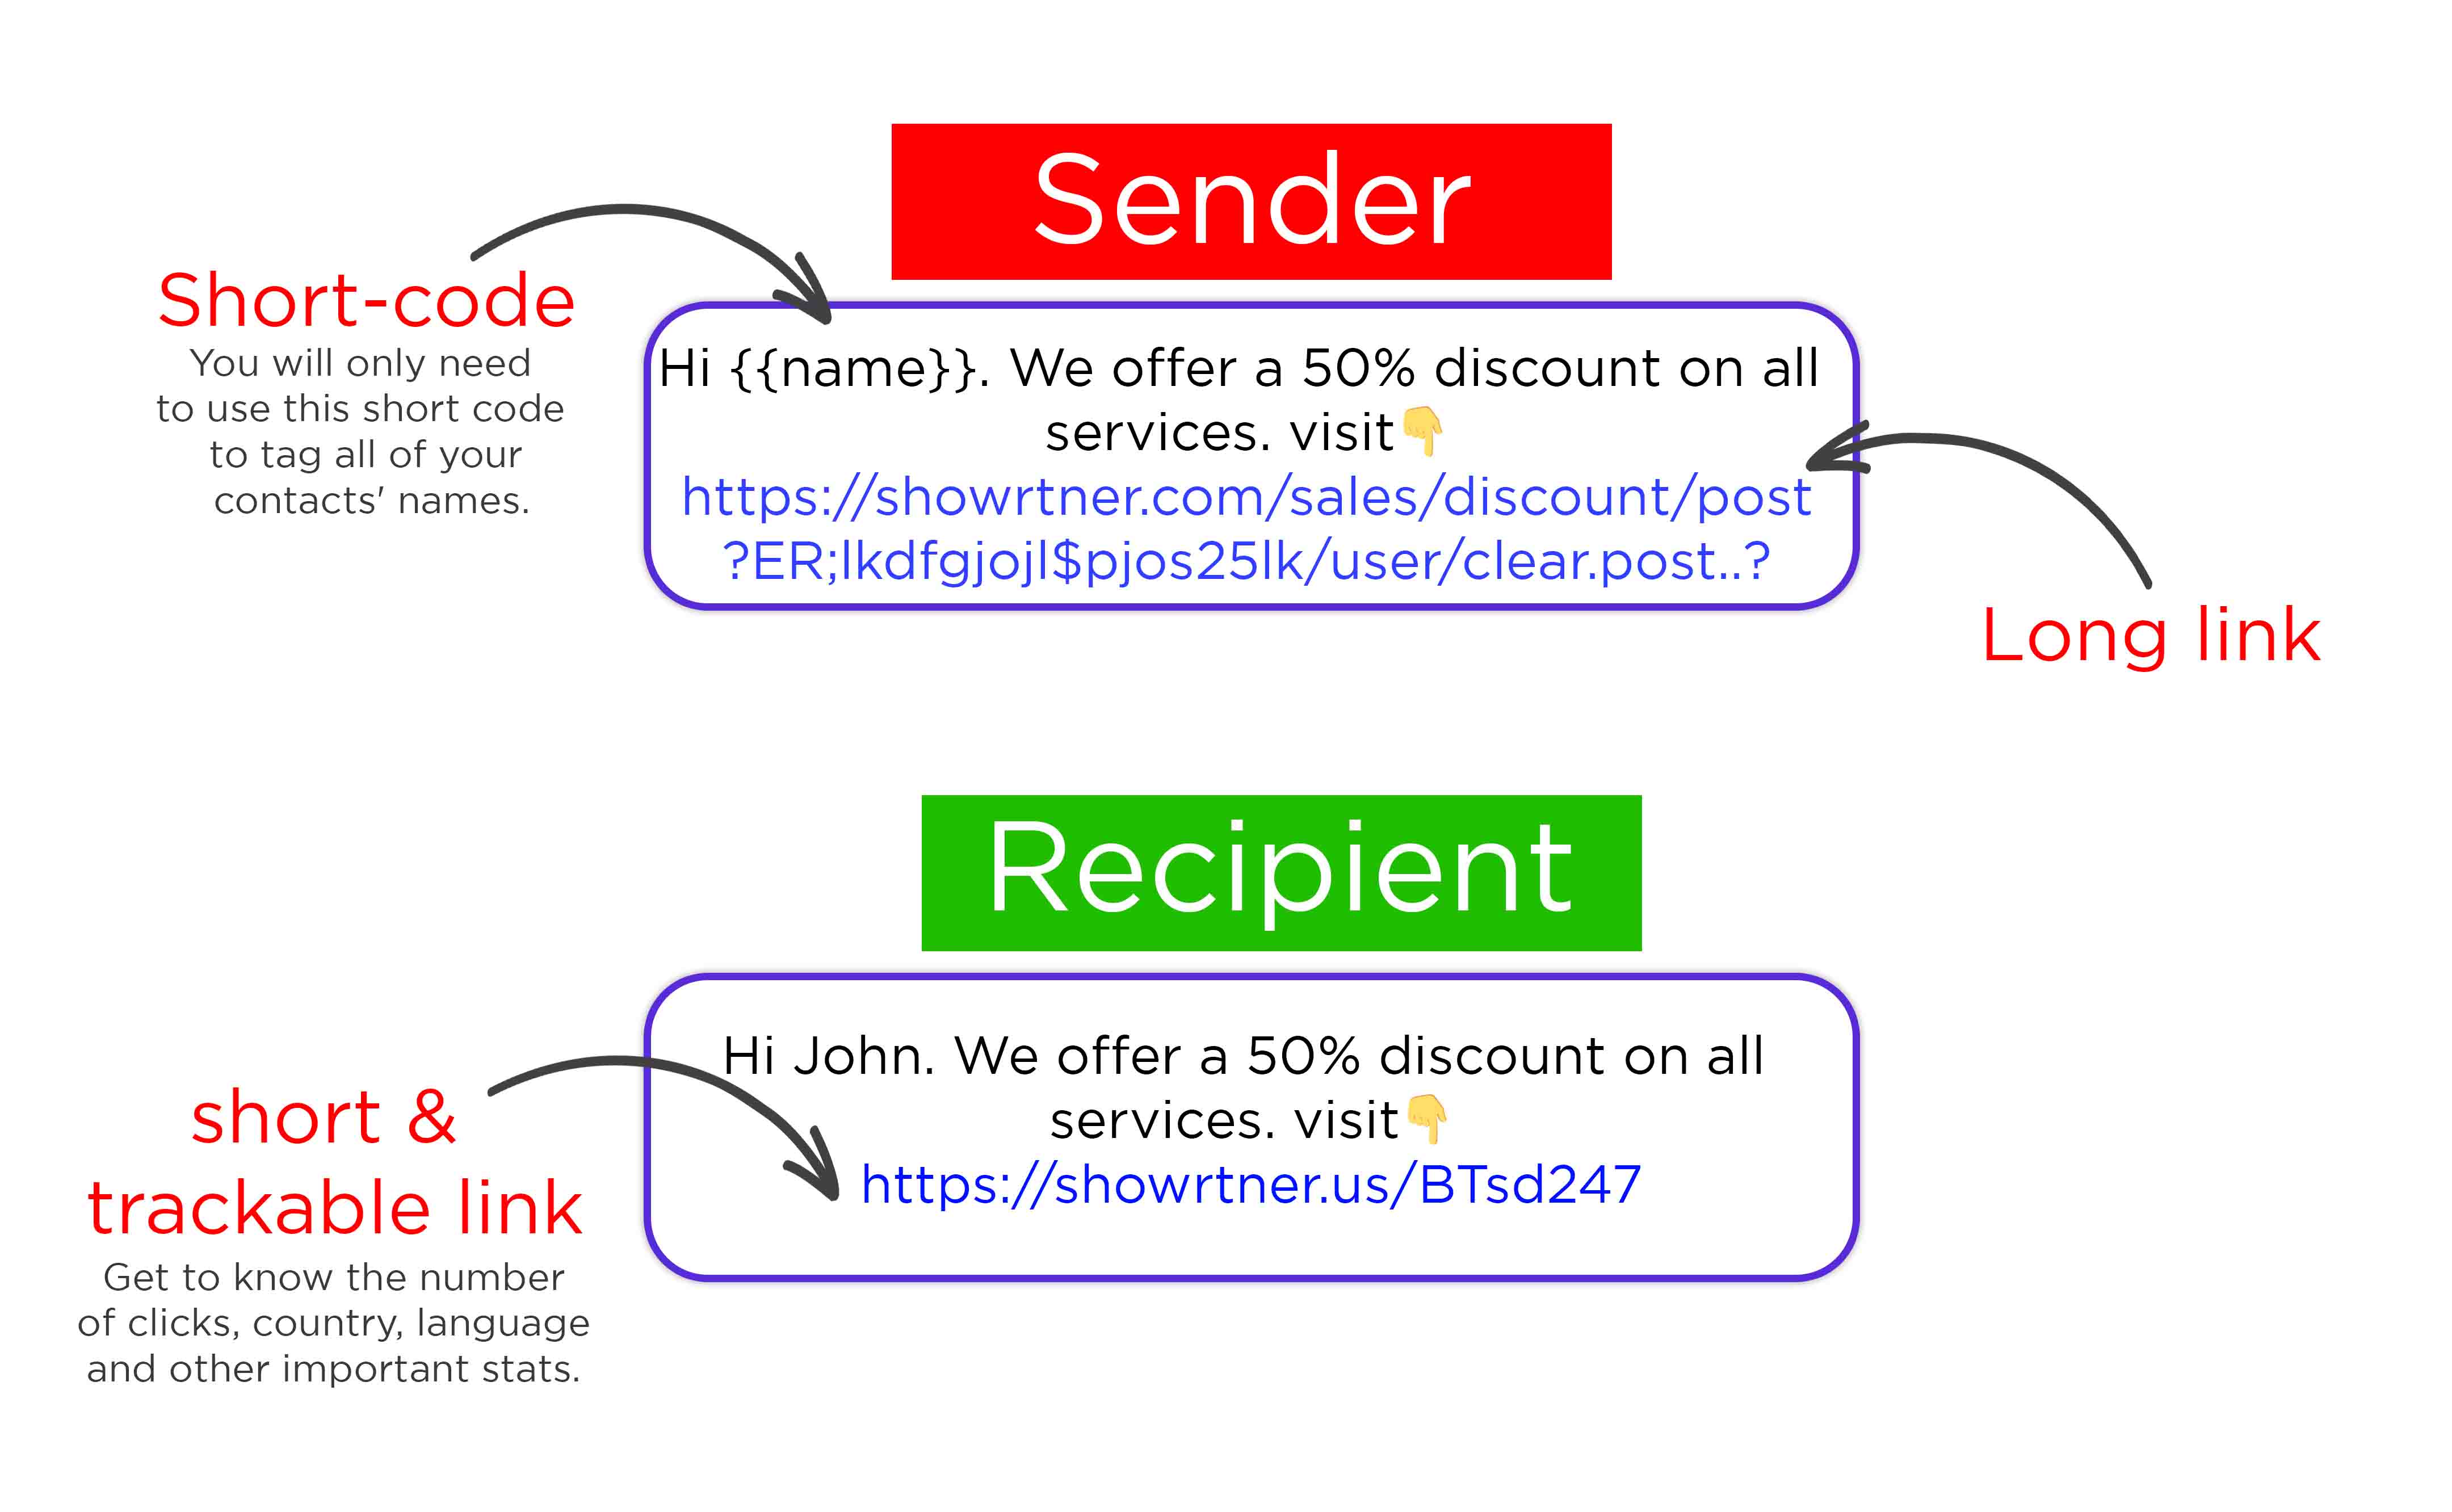 The link shortener converts a standard message into a smart and trackable message with shortcodes